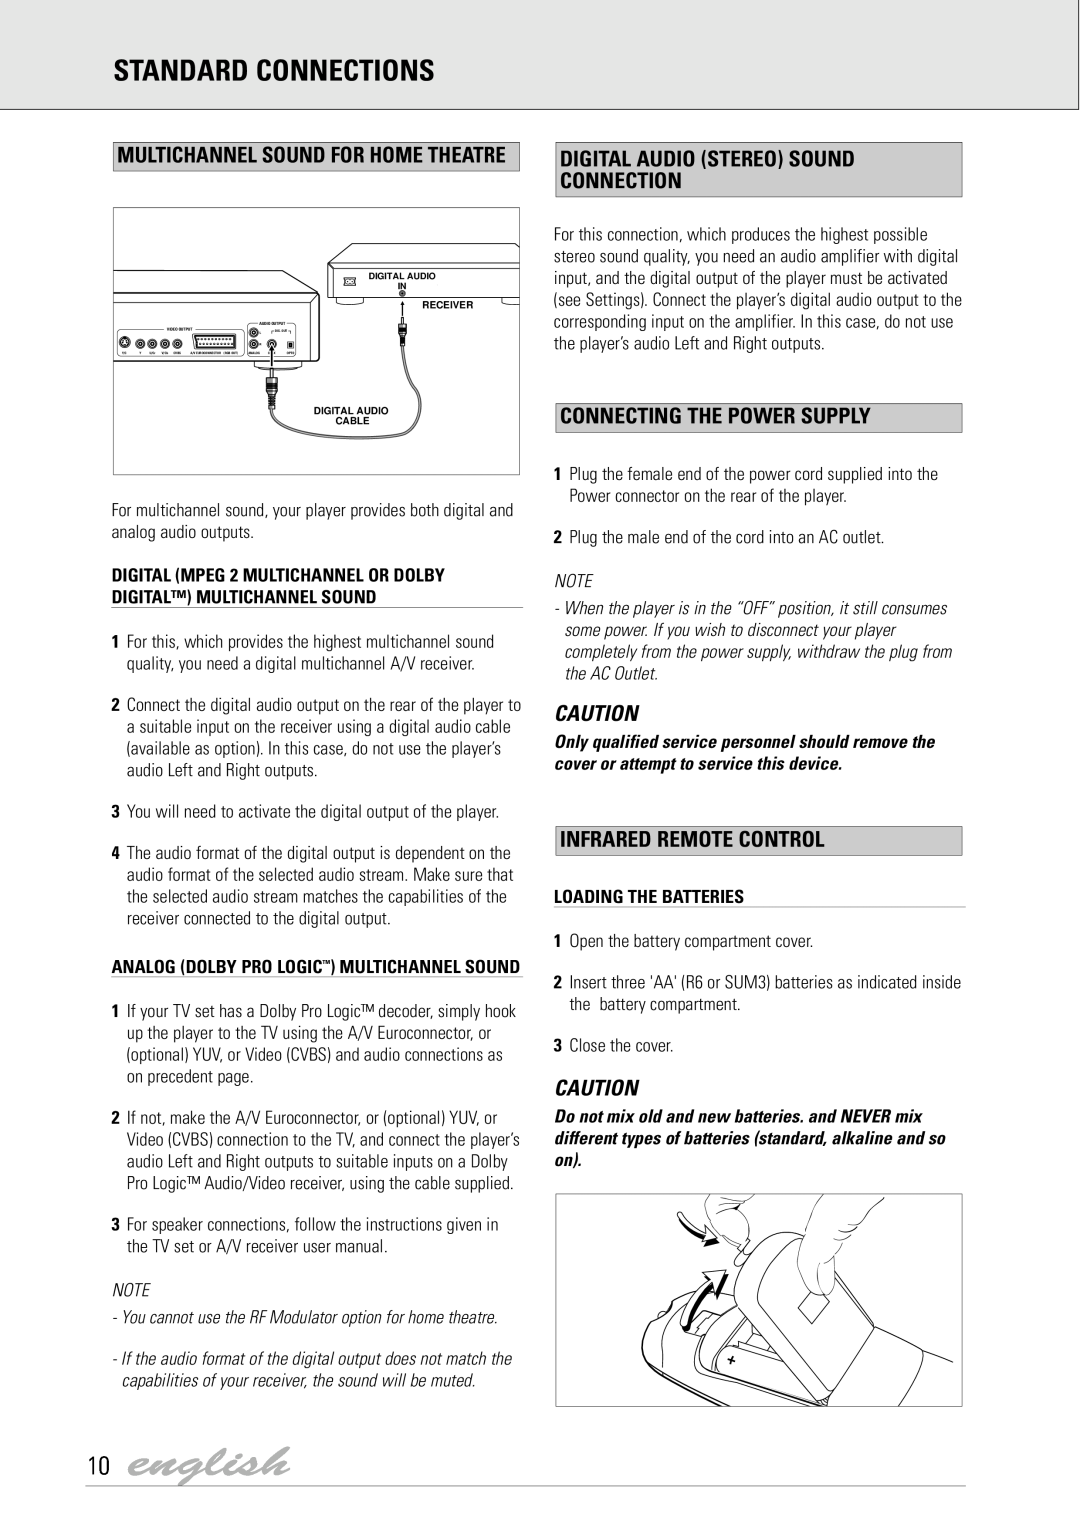 Dolby Laboratories DVD Video manual english, Digital Audio Stereo Sound Connection, Connecting The Power Supply 